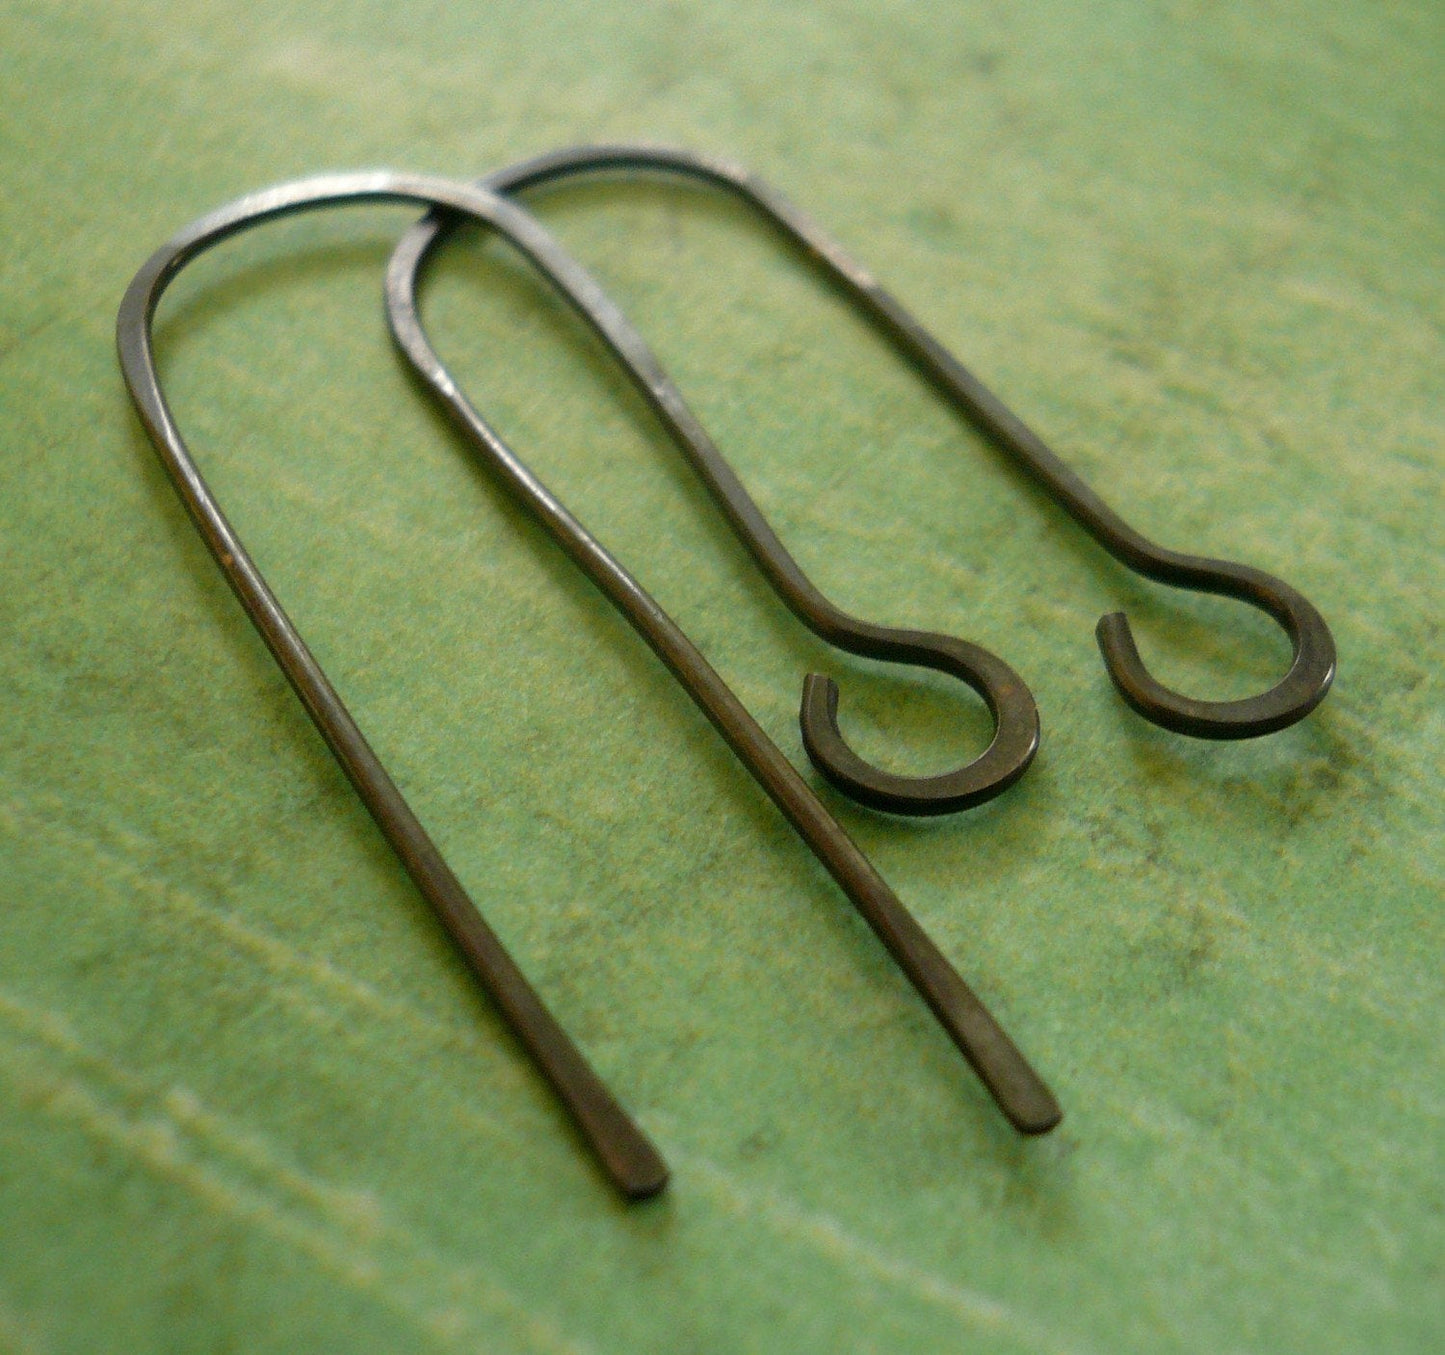 12 Pairs of my Minimalist Sterling Silver Earwires - Handmade. Handforged. Heavily Oxidized